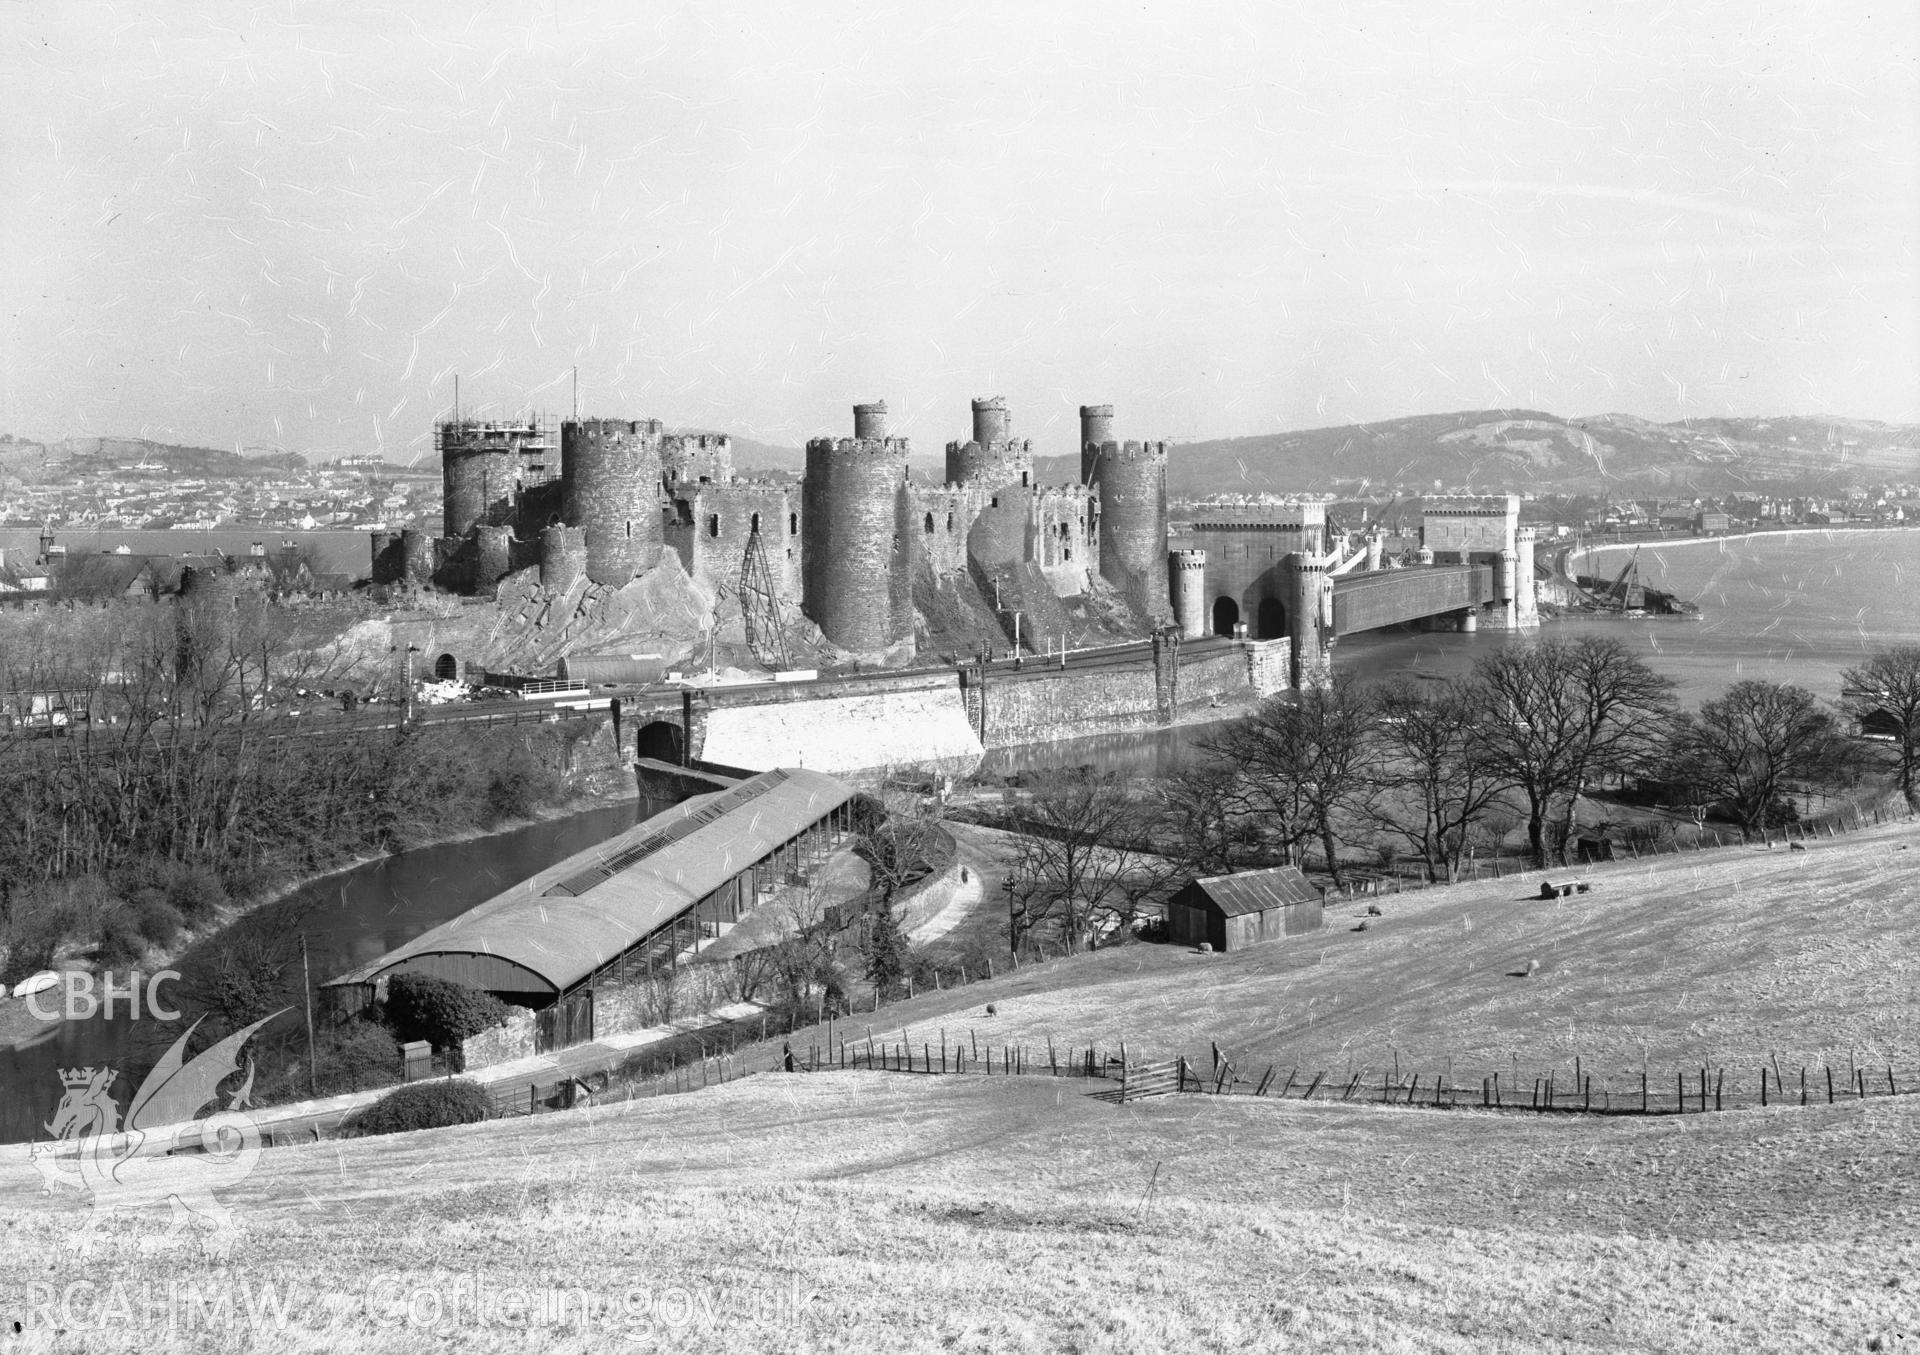 D.O.E photograph of Conwy Castle & Town Walls. Distant views.